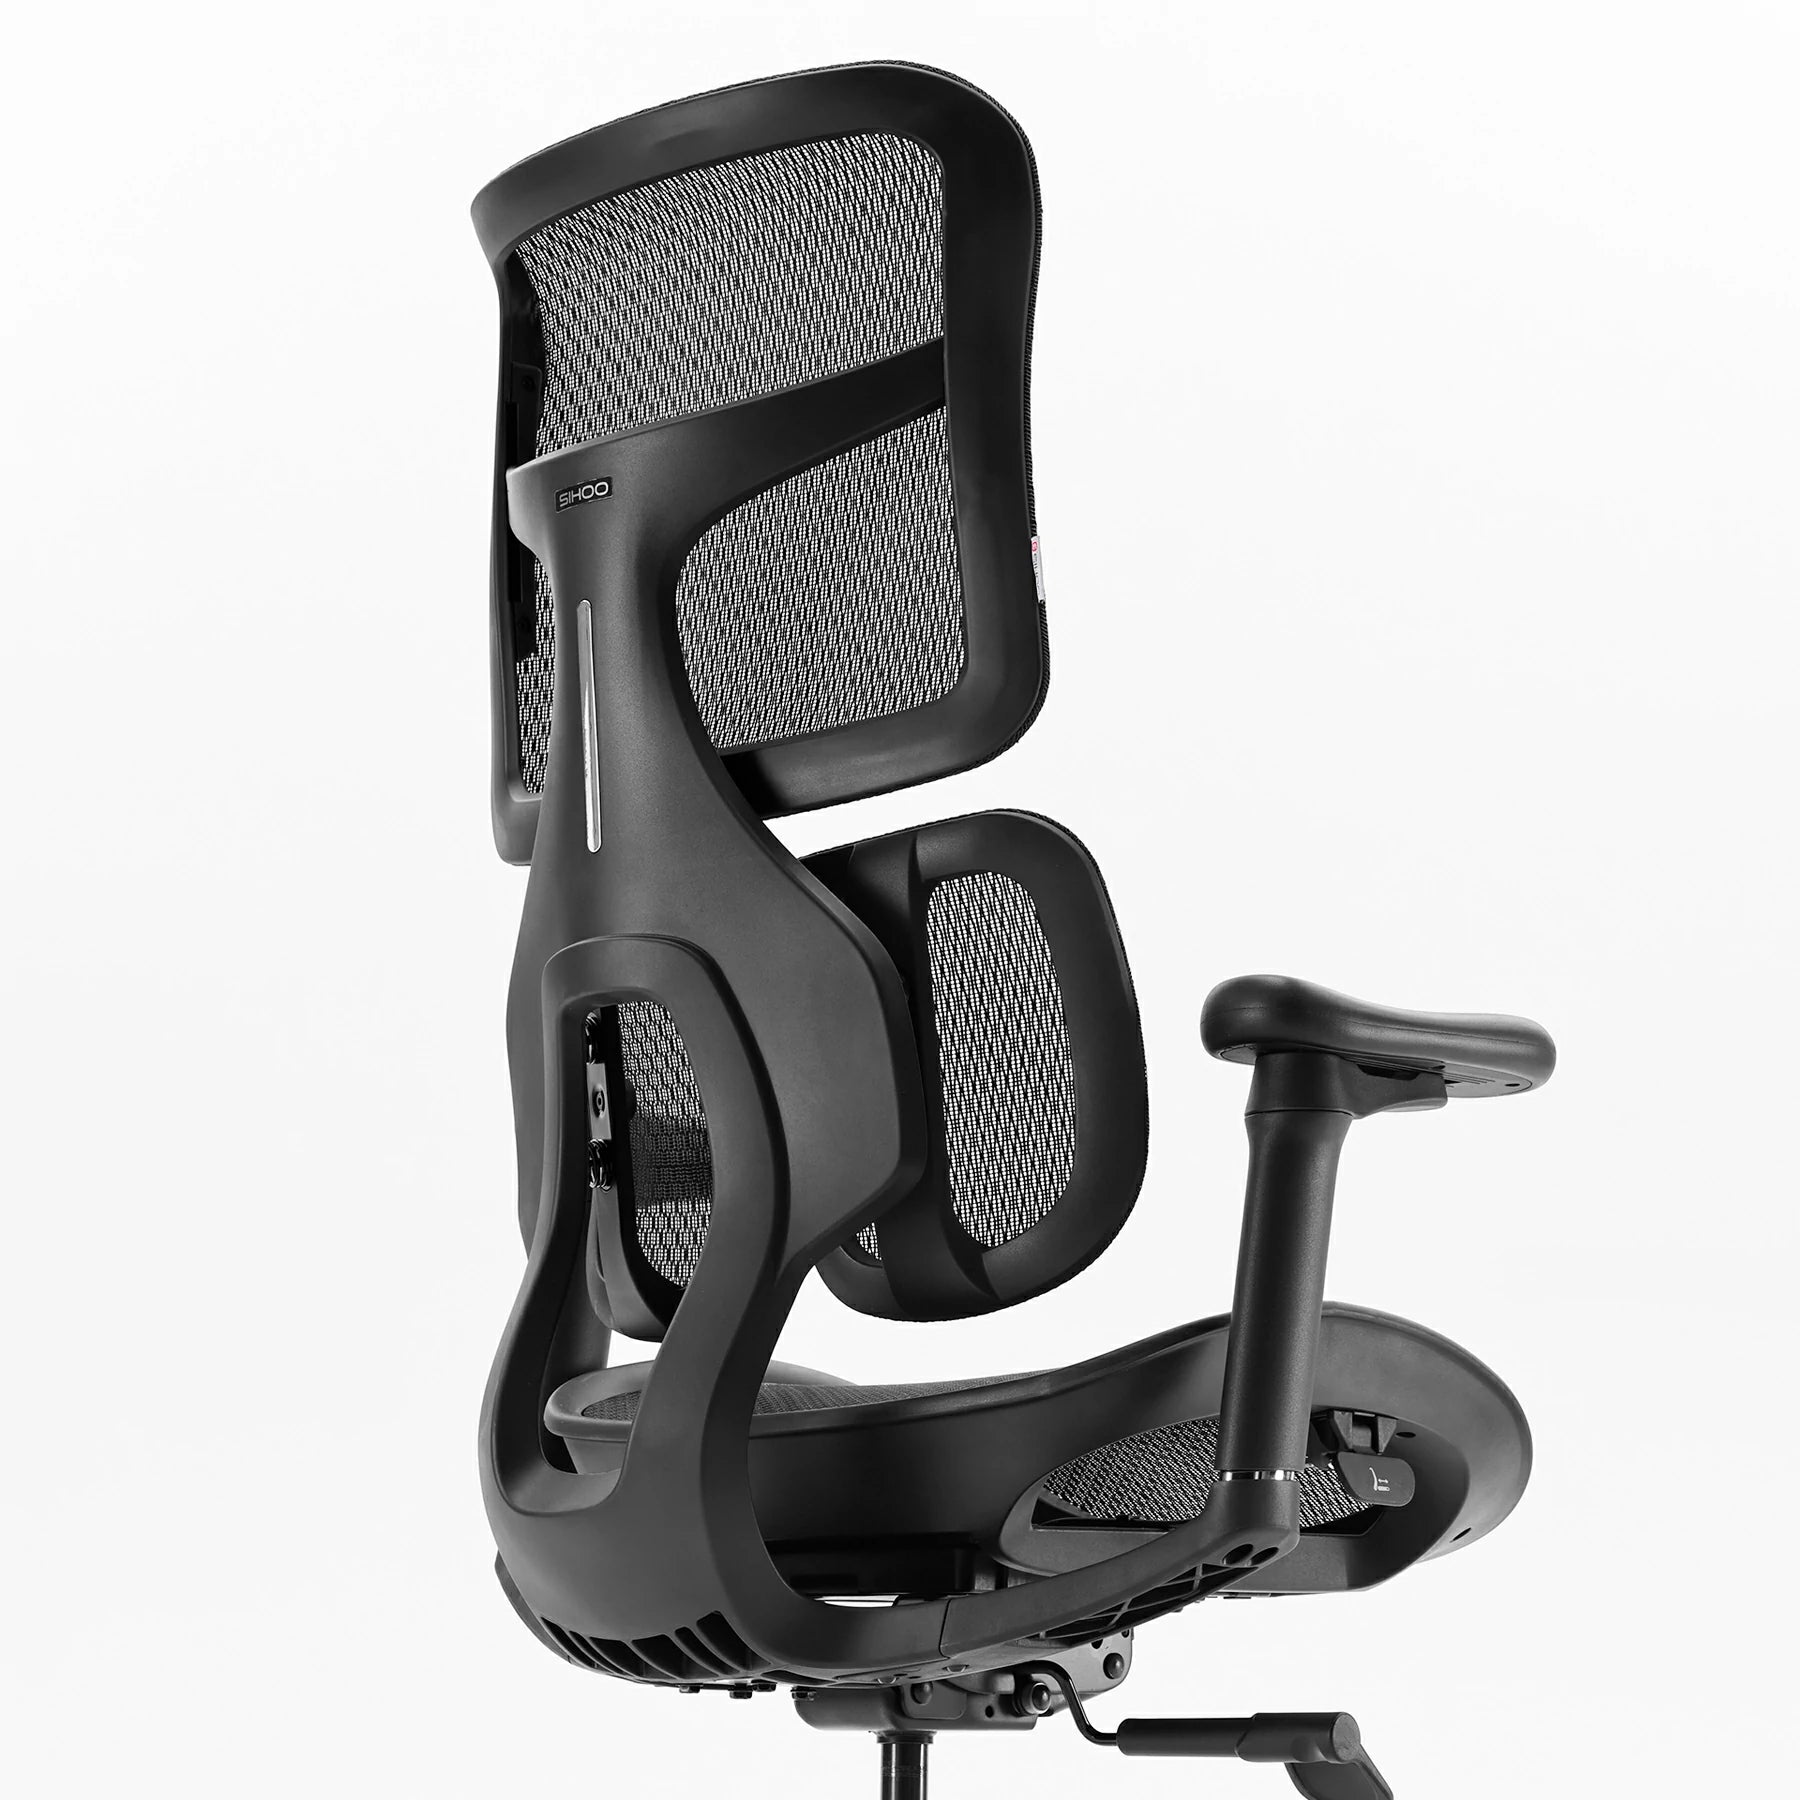 (NEW) Sihoo Doro S100 Ergonomic Office Chair with Dual Dynamic Lumbar Support